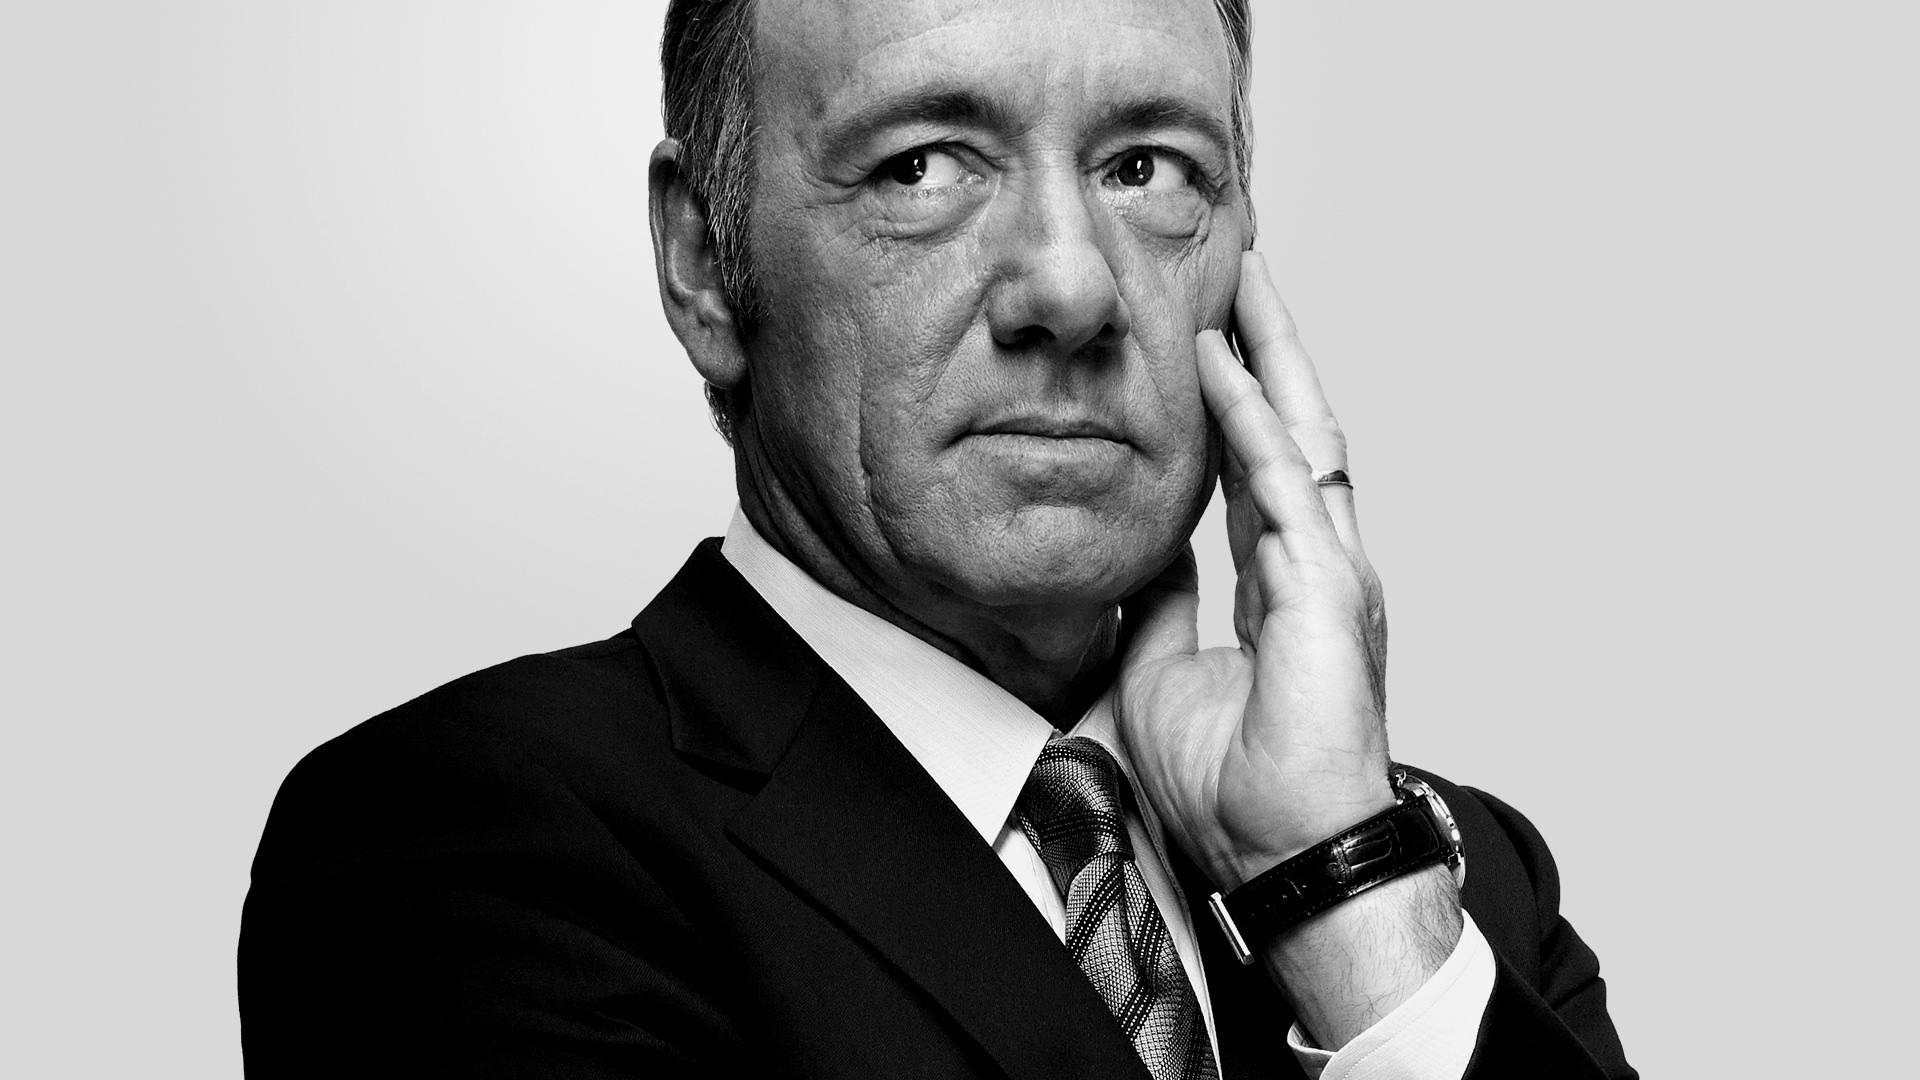 Kevin Spacey In Black And White Wallpaper